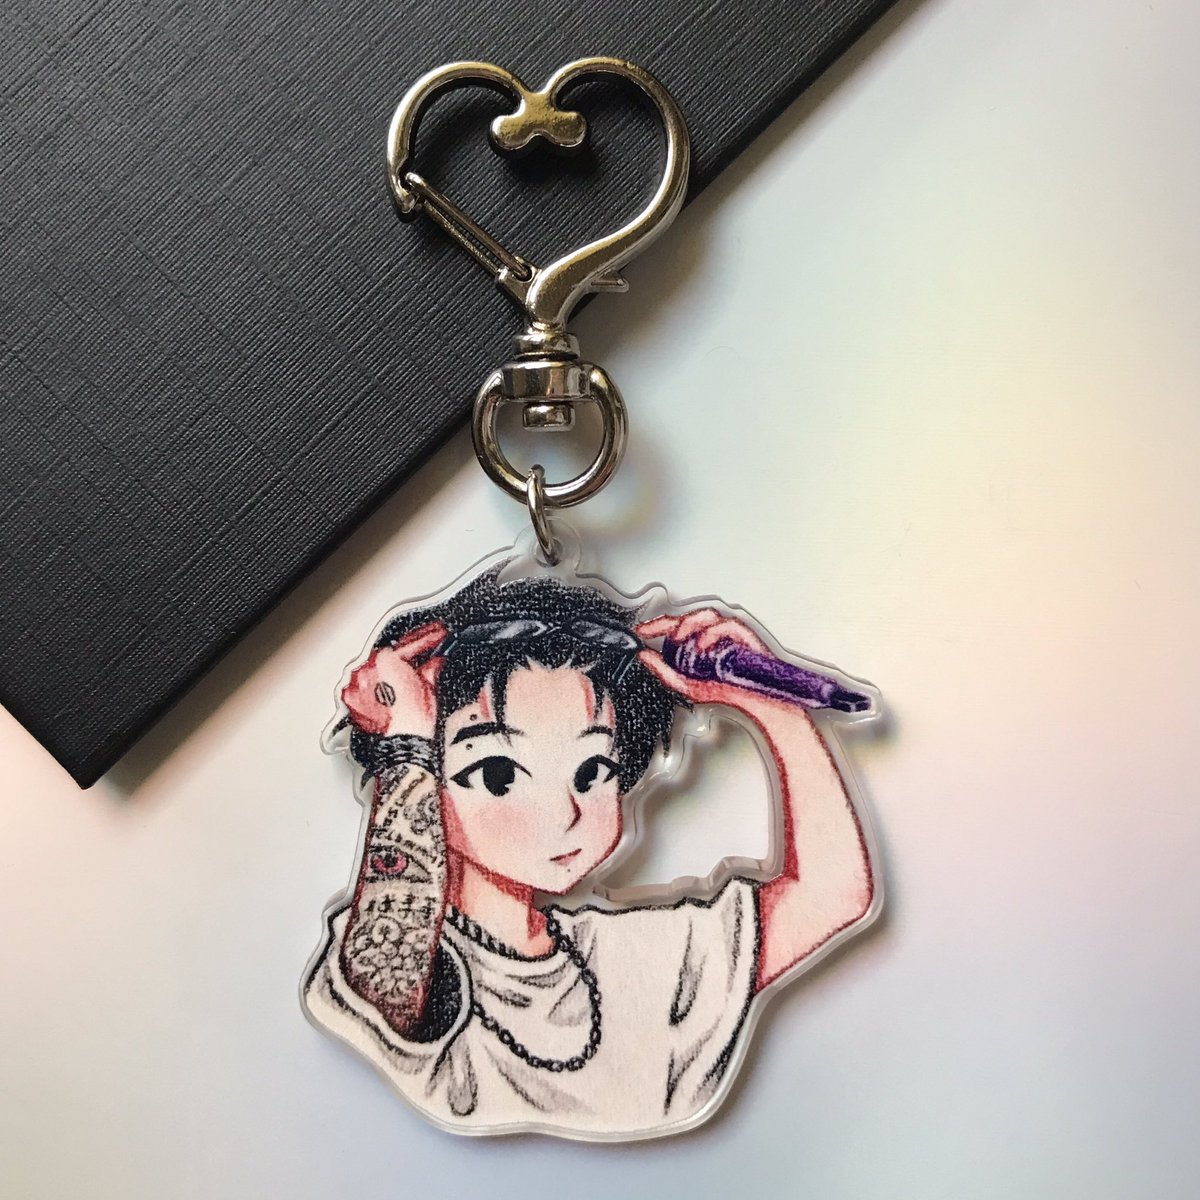 「These adorable Jungkook keychains are no」|Alyssa⁷🌸のイラスト